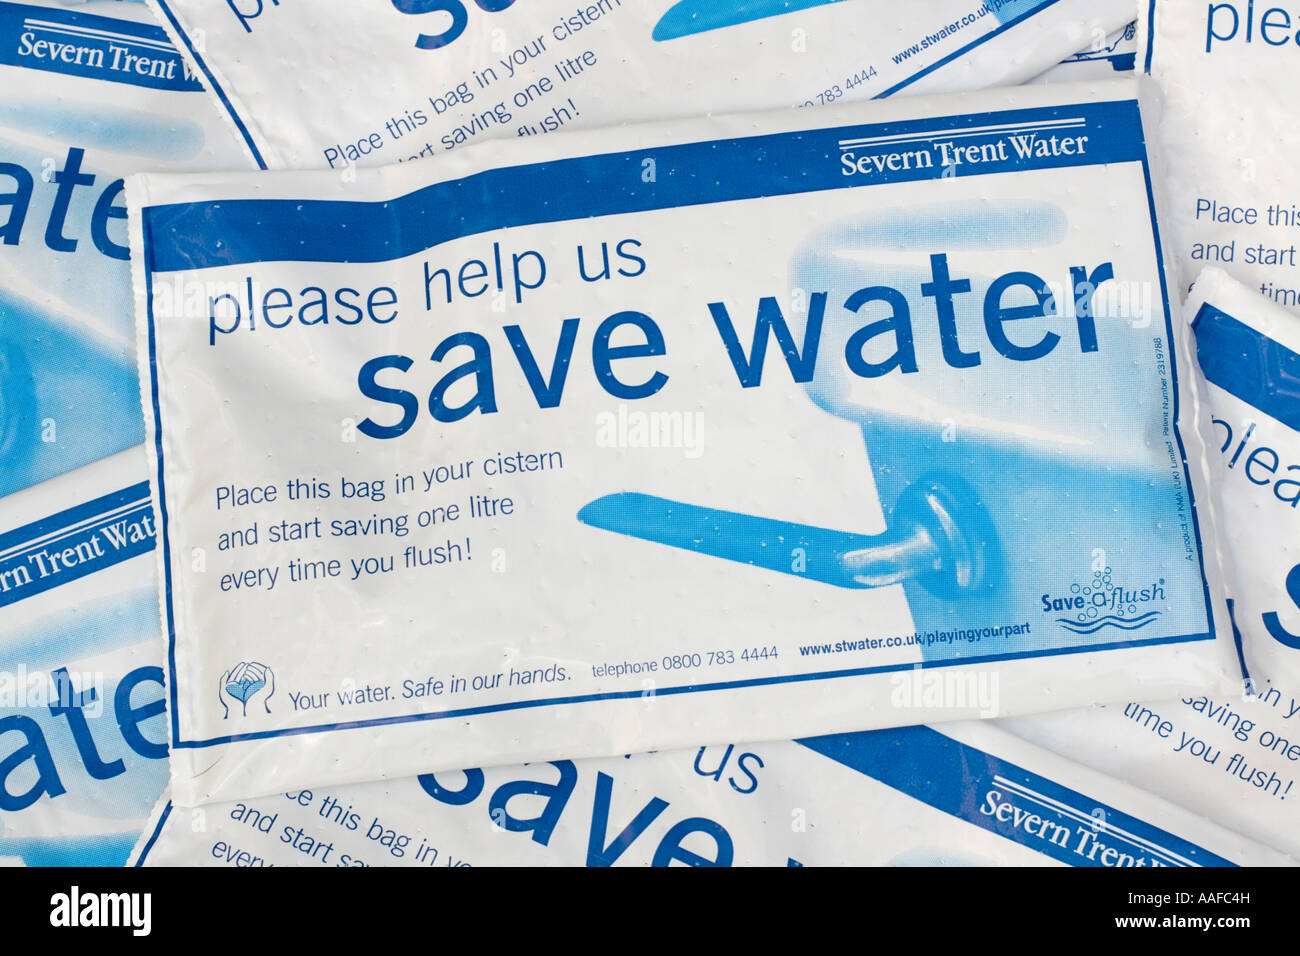 Water hippo saveaflush bags provided free by Severn Trent Water to conserve  water in toilet cistern UK Stock Photo - Alamy